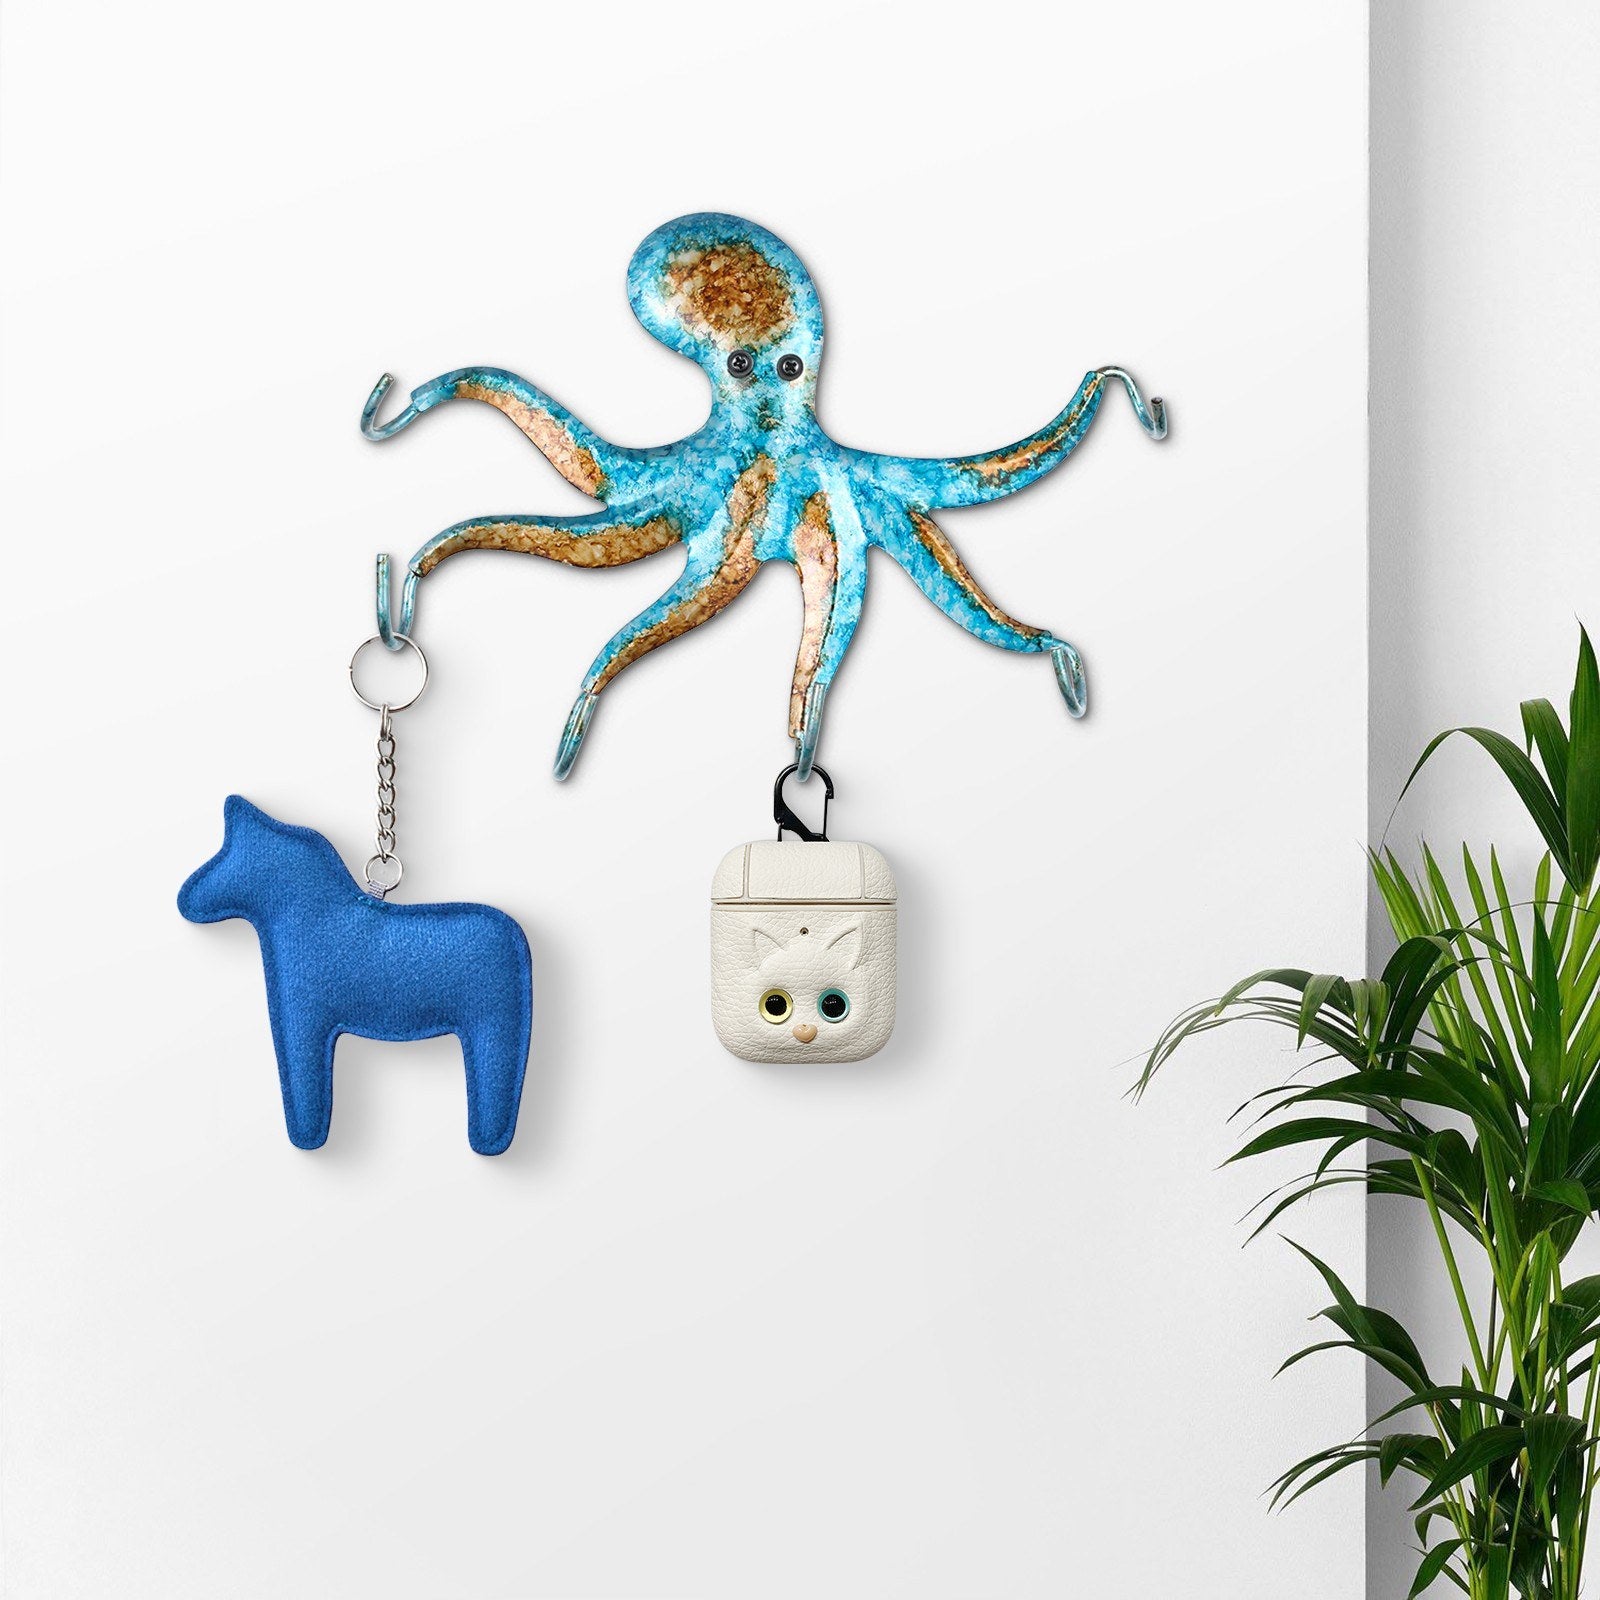 This unusual octopus wall hook is perfect for anyone looking to spice up their home with something that will stand out